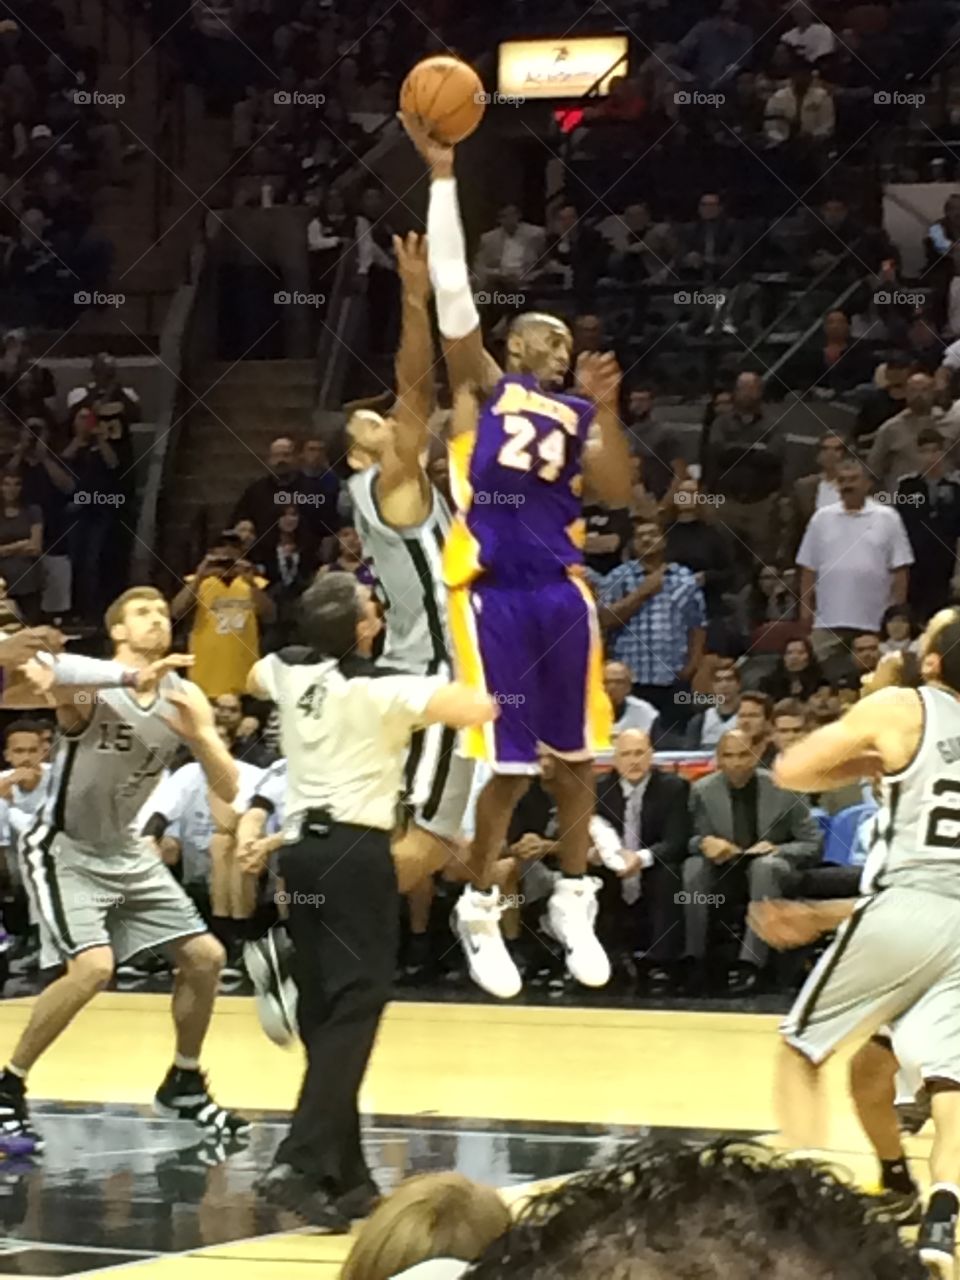 NBA star Kobe Bryant playing for the Los Angeles Lakers against the San Antonio Spurs. December 12, 2014